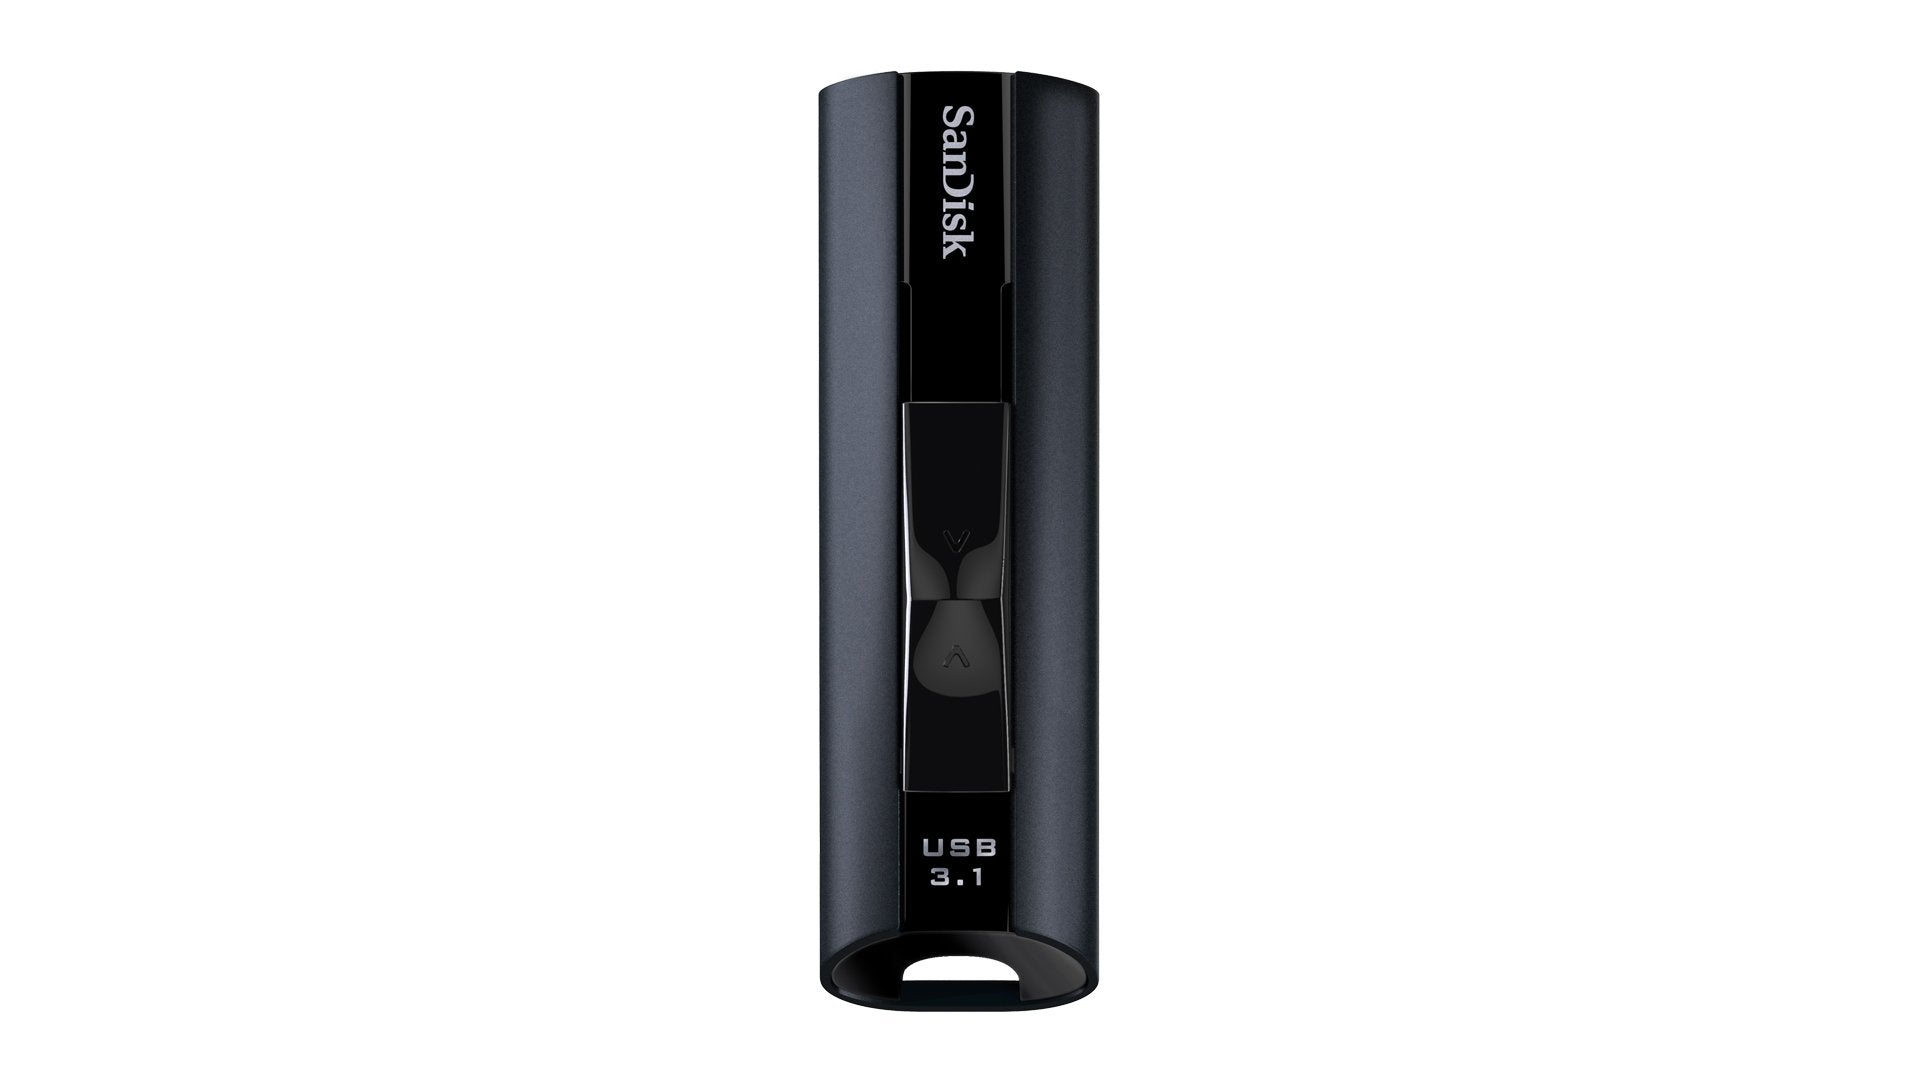 SanDisk SDCZ880-128G-G46 Extreme PRO 128GB USB 3.1 Solid State Flash Drive